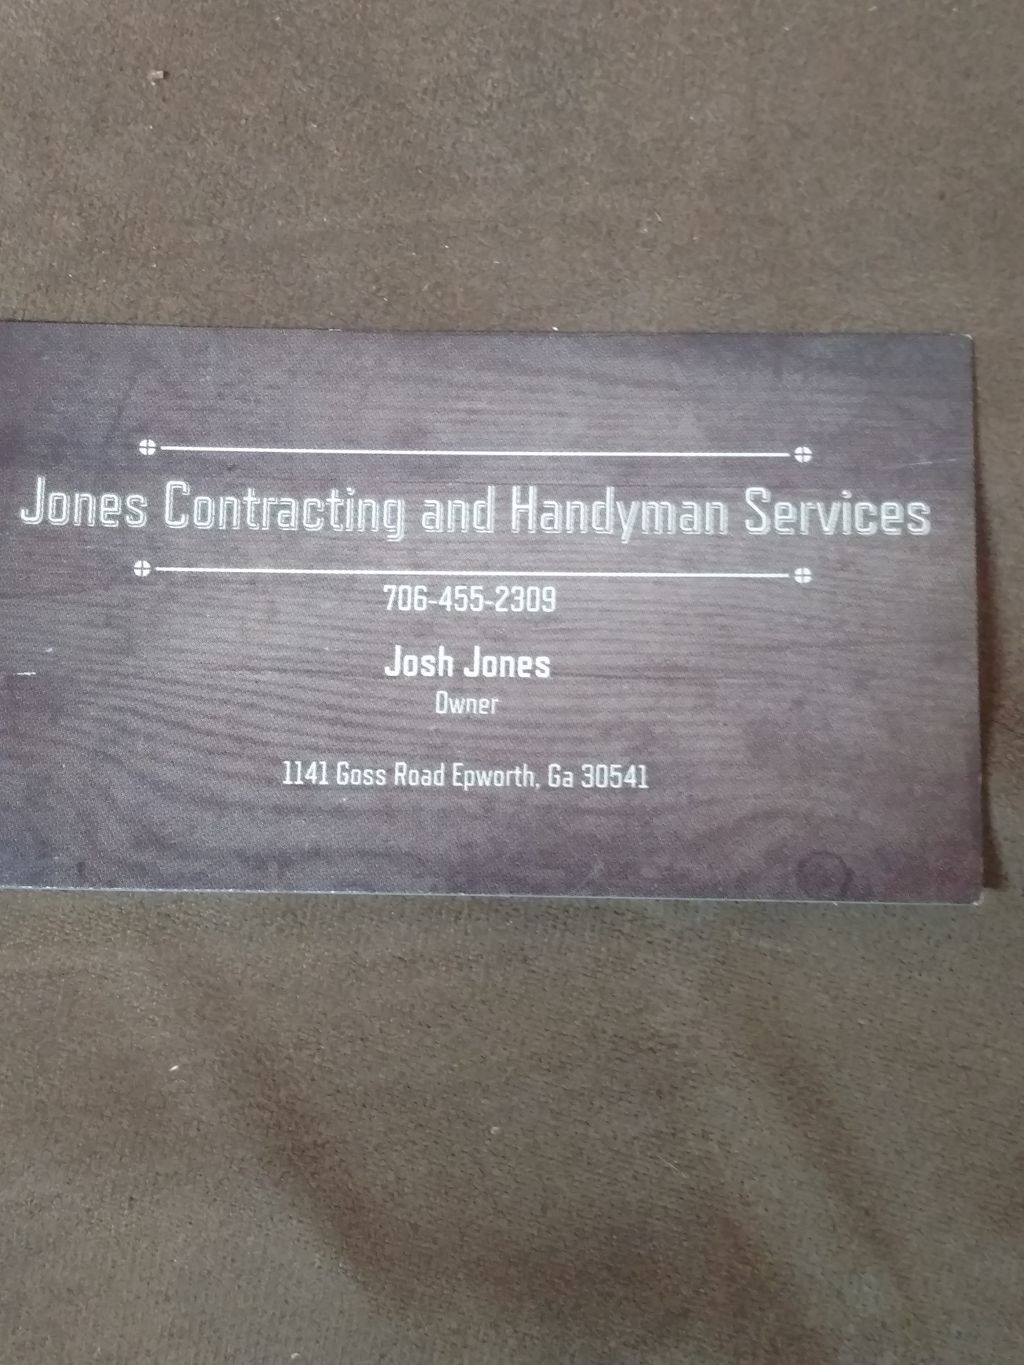 Jones contracting and handyman services